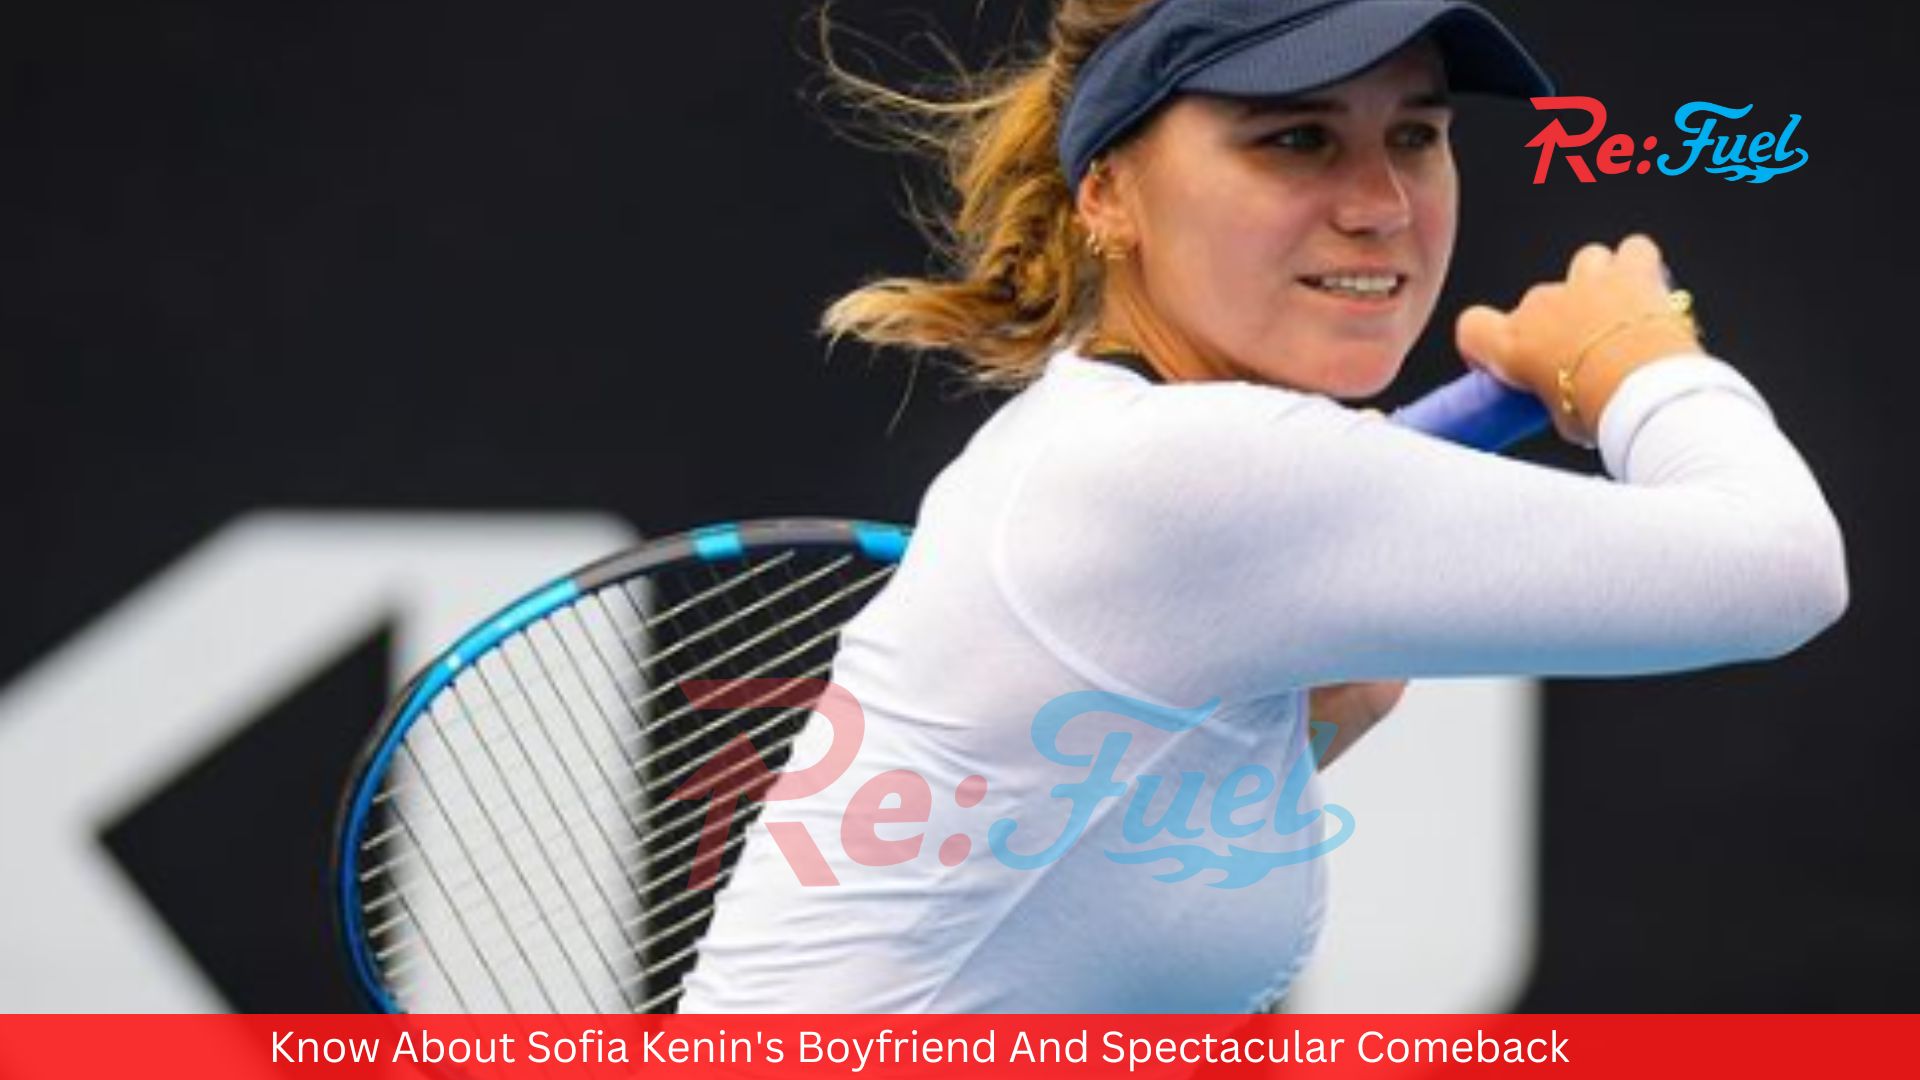 Know About Sofia Kenin's Boyfriend And Spectacular Comeback